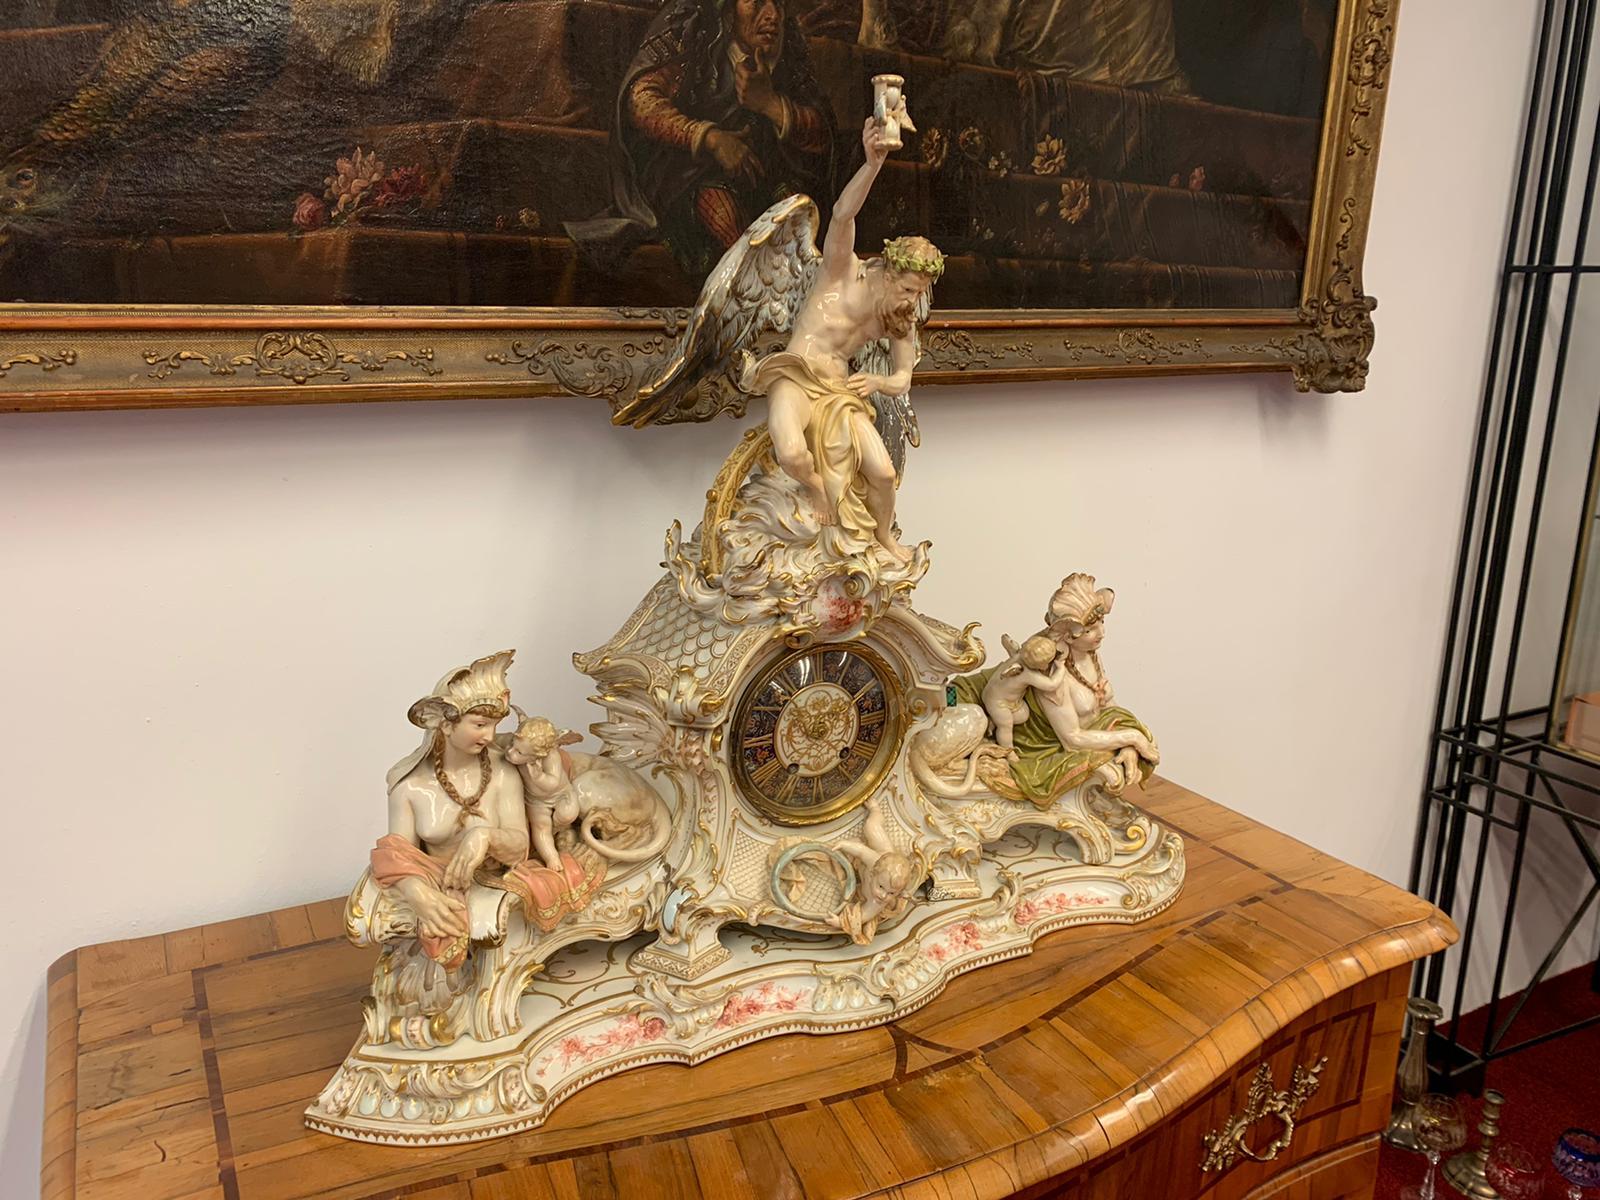 A Berlin (K.P.M) Porcelain figural mantel (fireplace) clock.
Dated 1892 blue Scepter and Iron-red orb marks, impressed model.

In the Neo Rococo style, modeled as father time holding a winged hourglass aloft,
seated on a spoked wheel among the